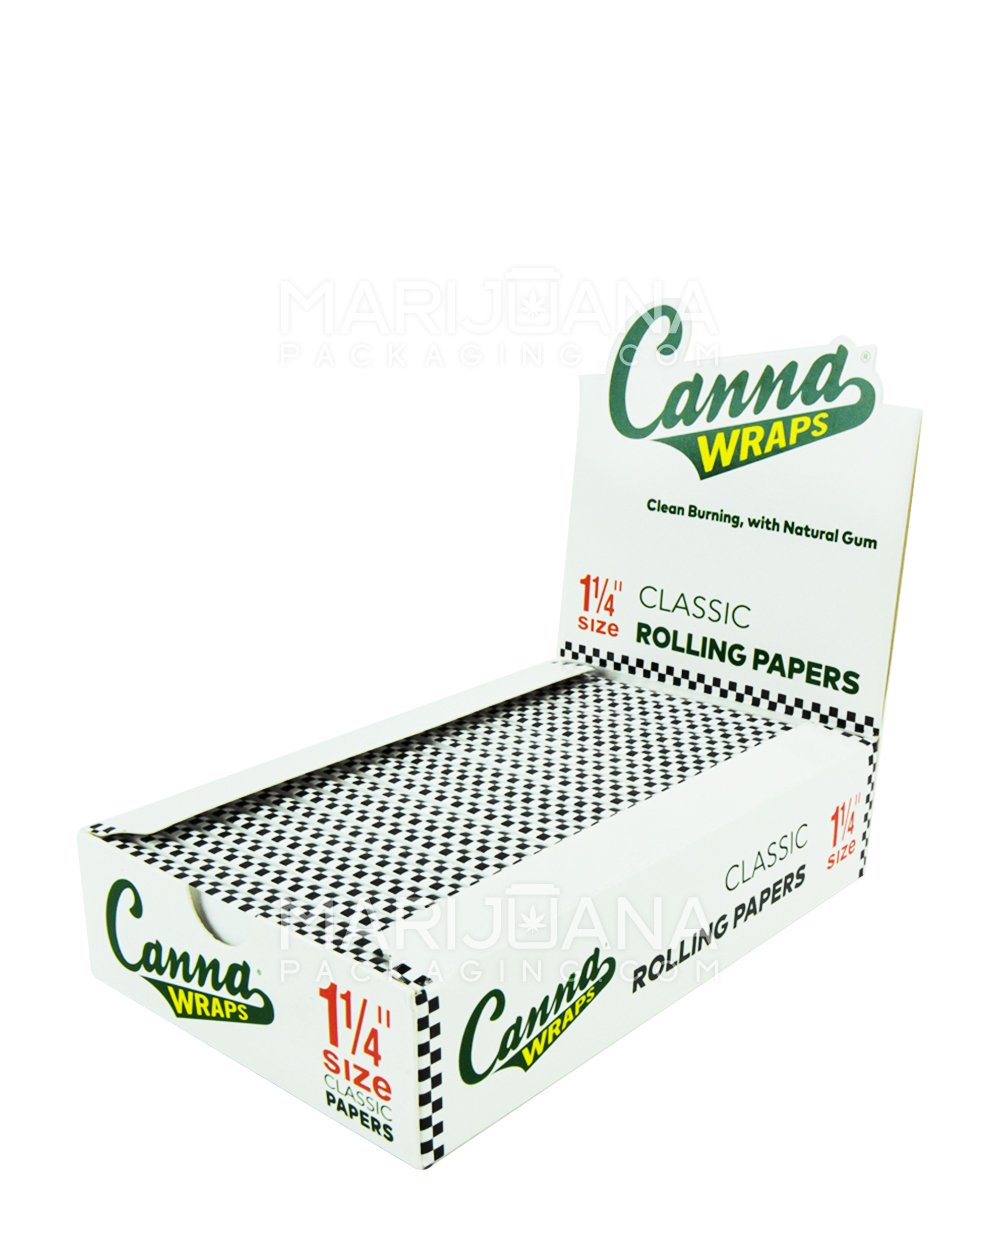 CANNA WRAPS | 'Retail Display' 1 1/4 Size Rolling Papers | 83mm - Classic - 25 Count - 1